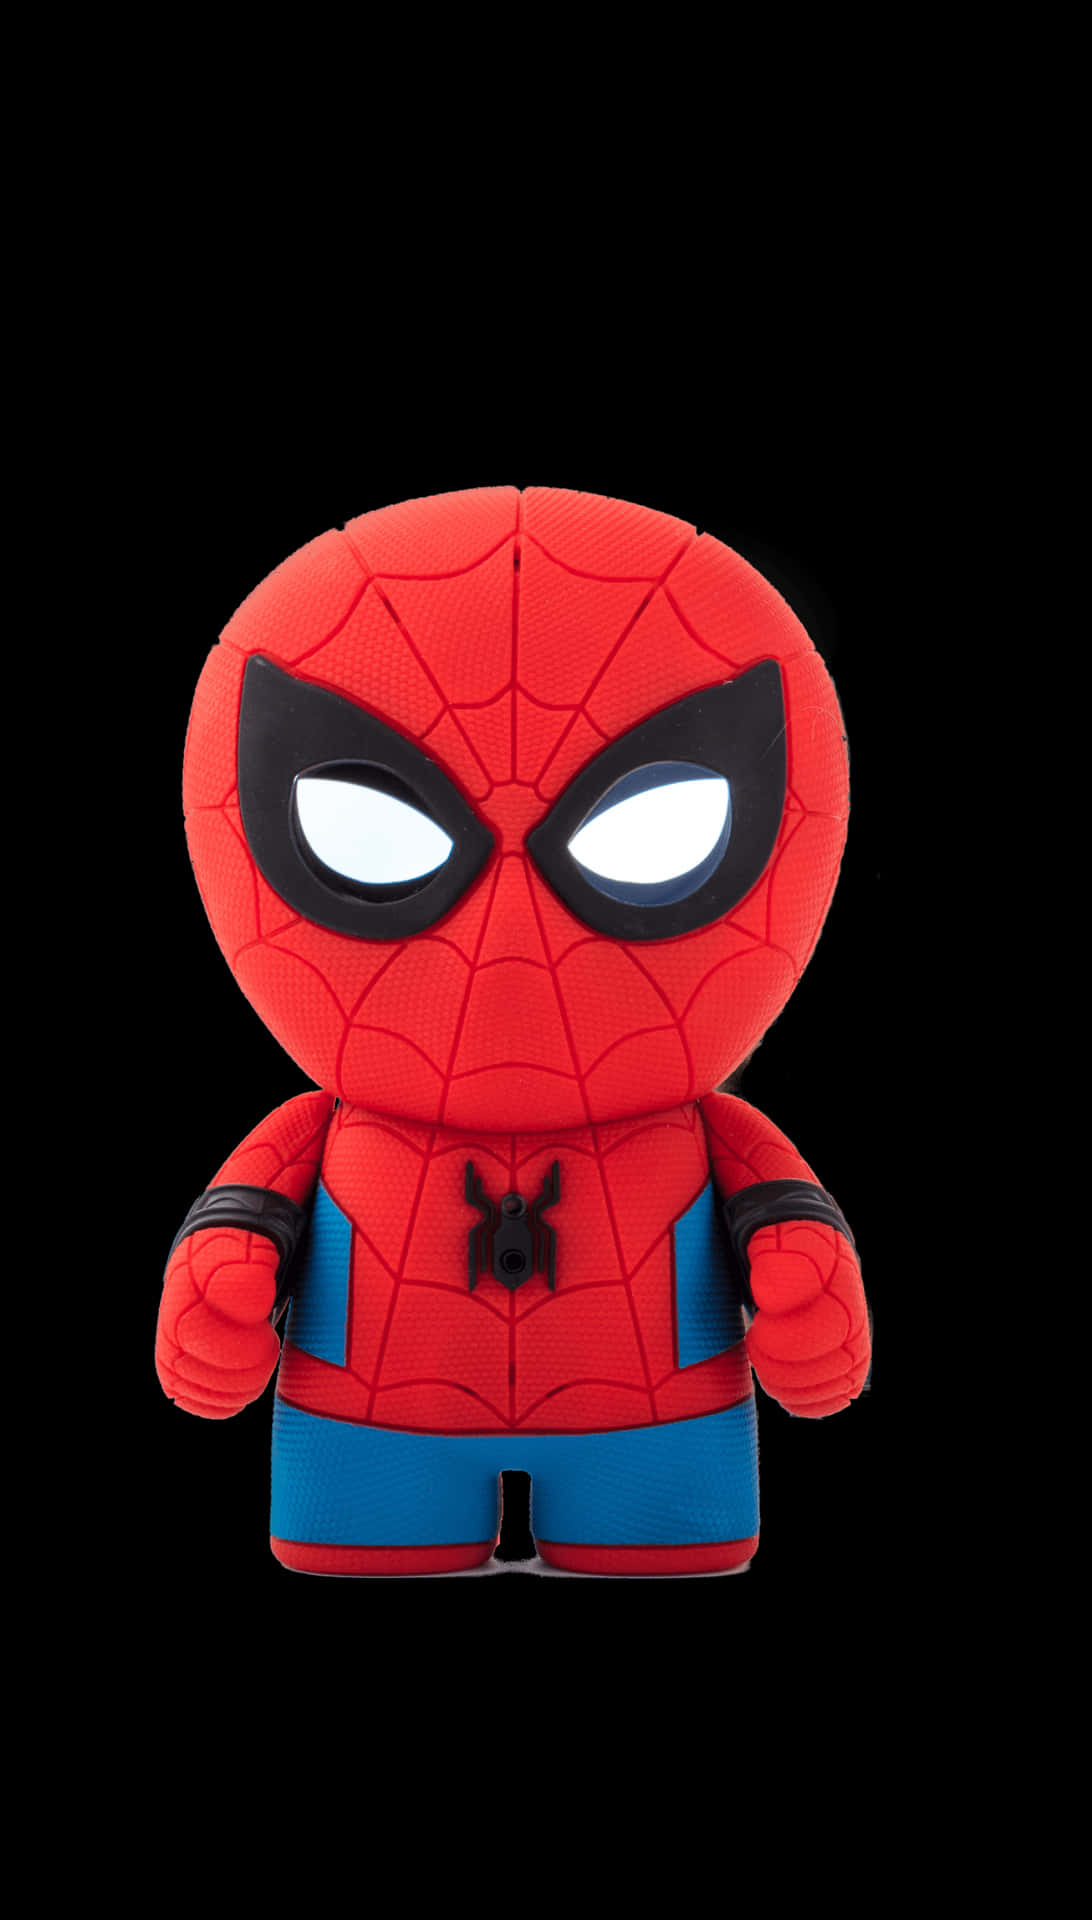 Spiderman Plush Toy Black Background PNG